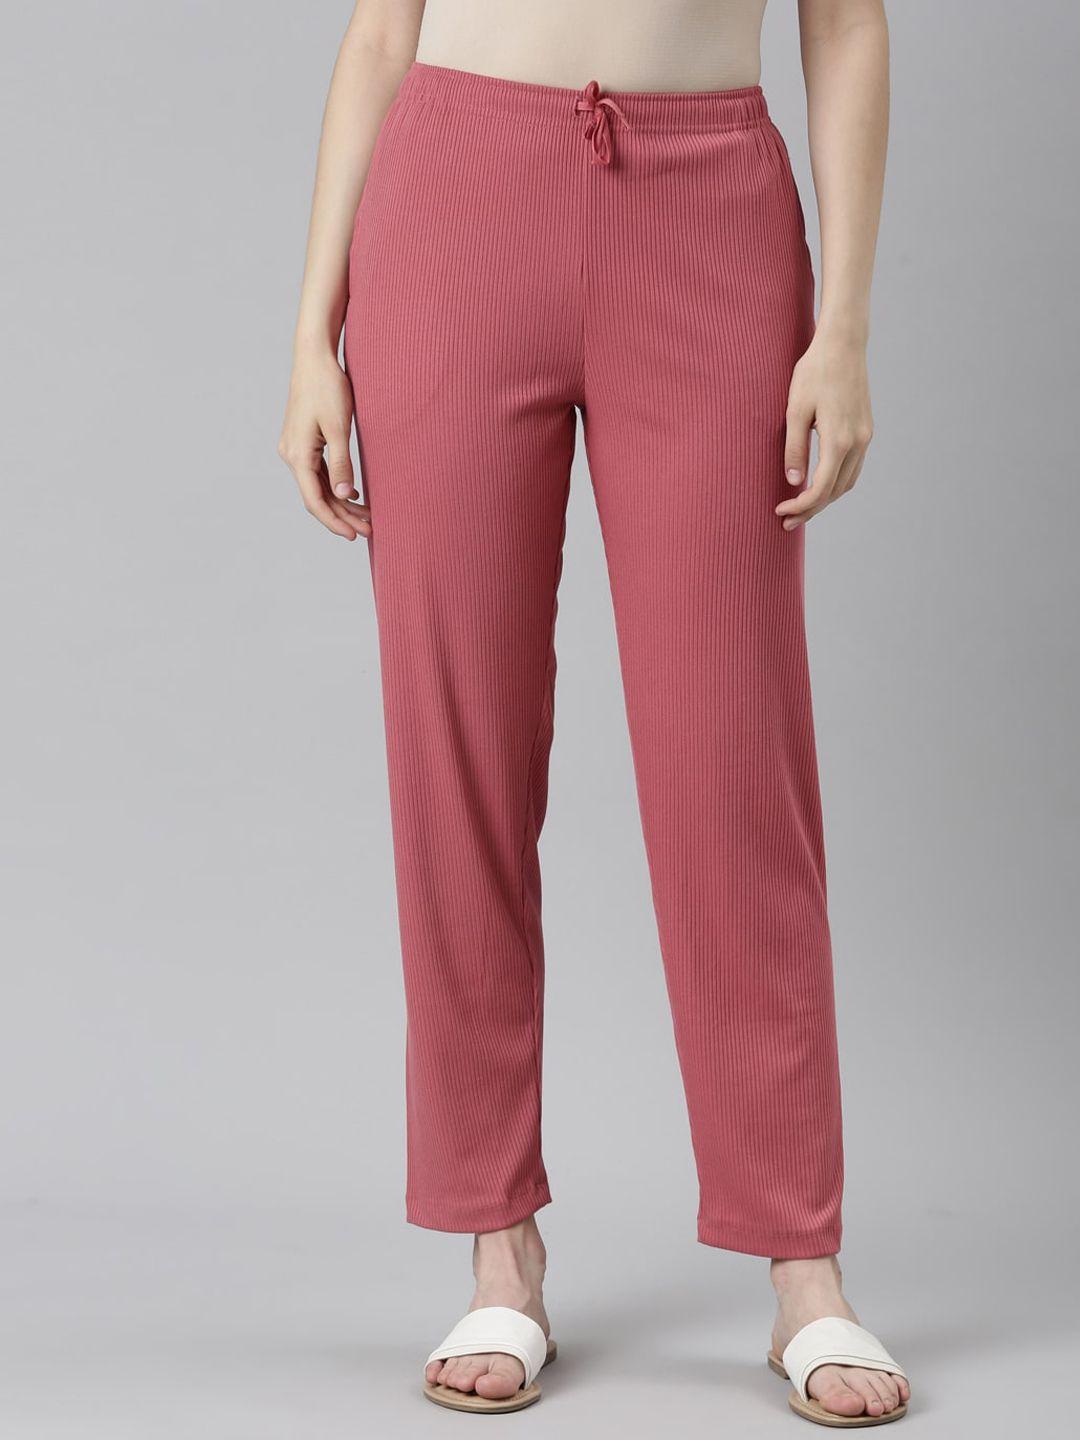 go-colors-women-relaxed-loose-fit-striped-regular-trouser